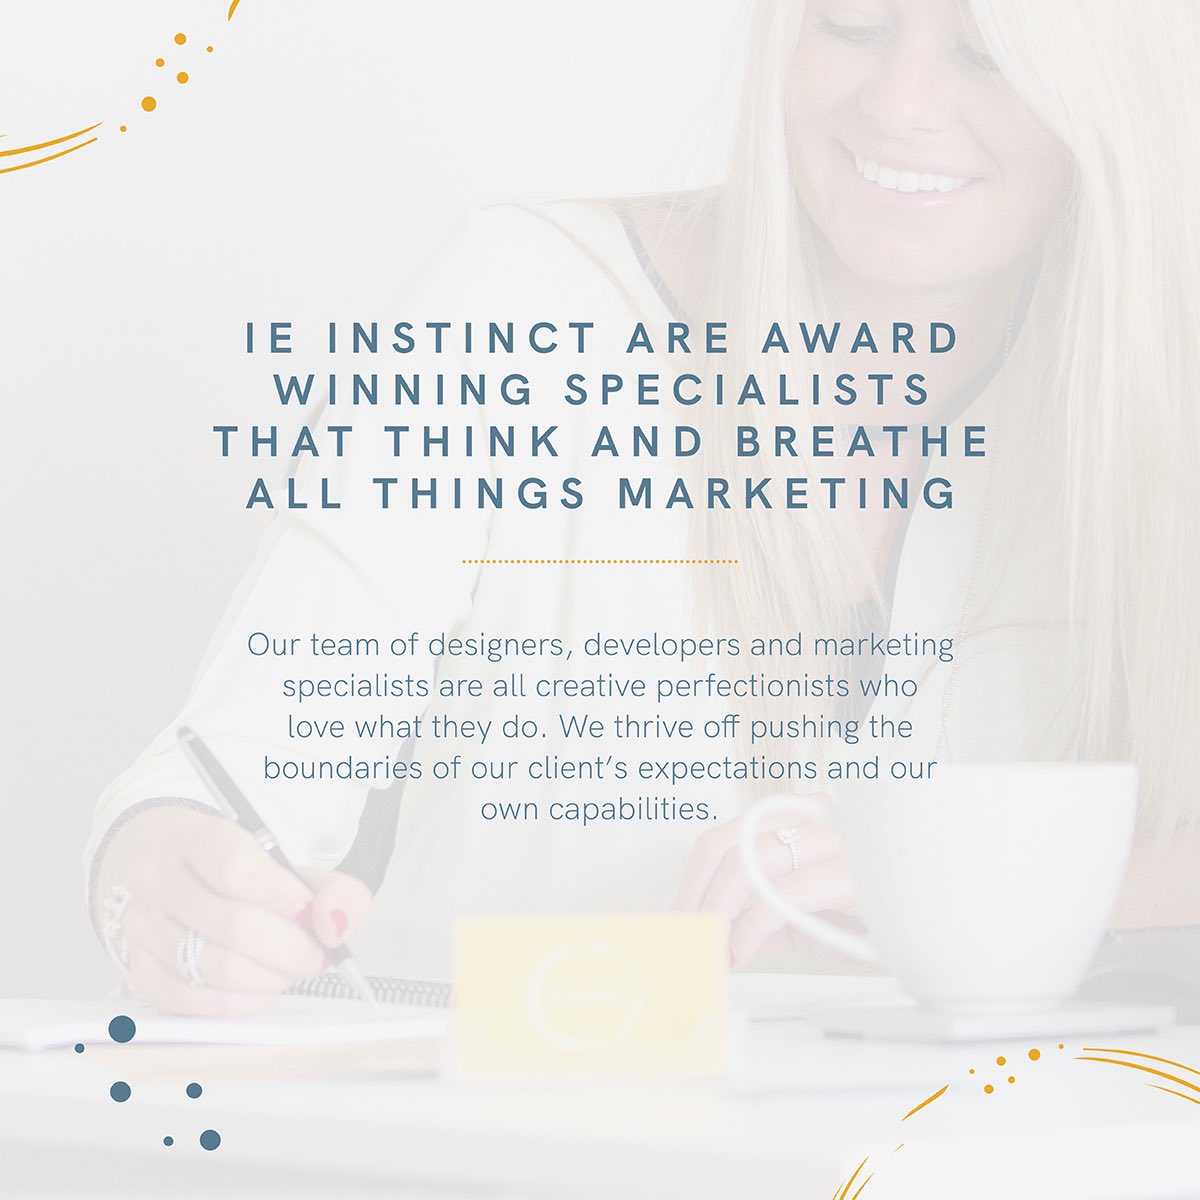 Sharing a little bit about us on a Saturday morning☕️✨. It’s true, we just love what we do. #ieinstinct #marketing #branding #socialmedia #content #digitalmarketing #website #graphicdesign #northwales